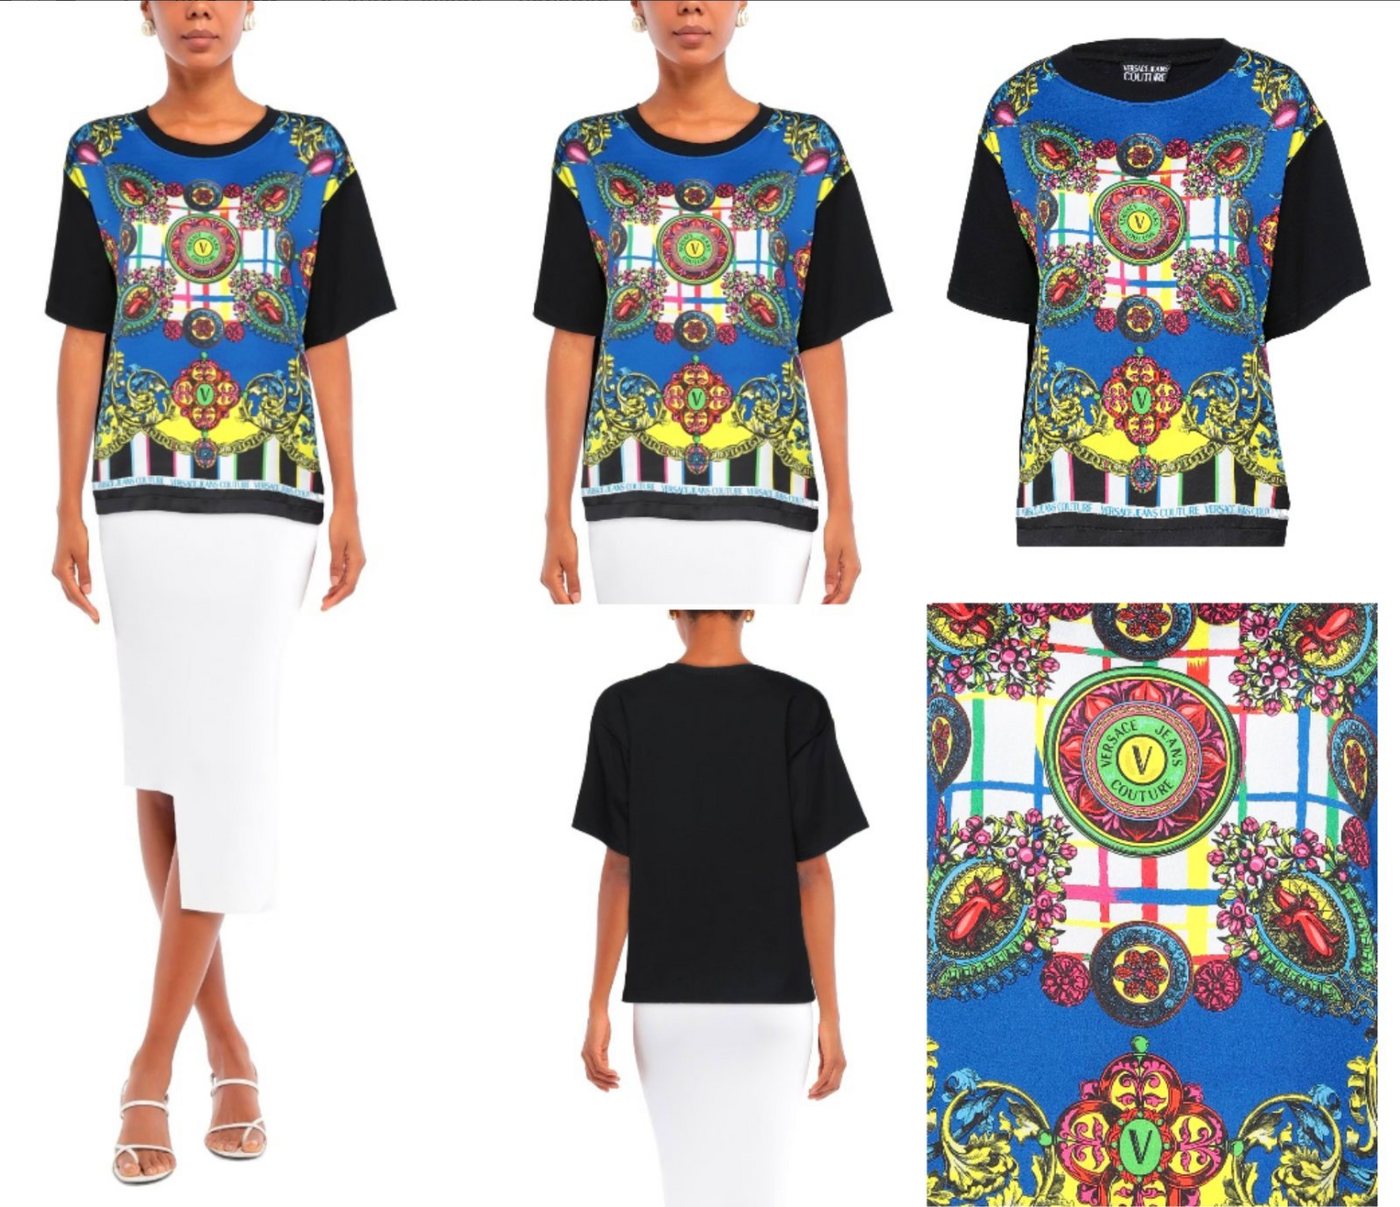 Versace T-Shirt VERSACE JEANS COUTURE PATTERNED Barock Top Bluse Shirt Oversized T-shi von Versace